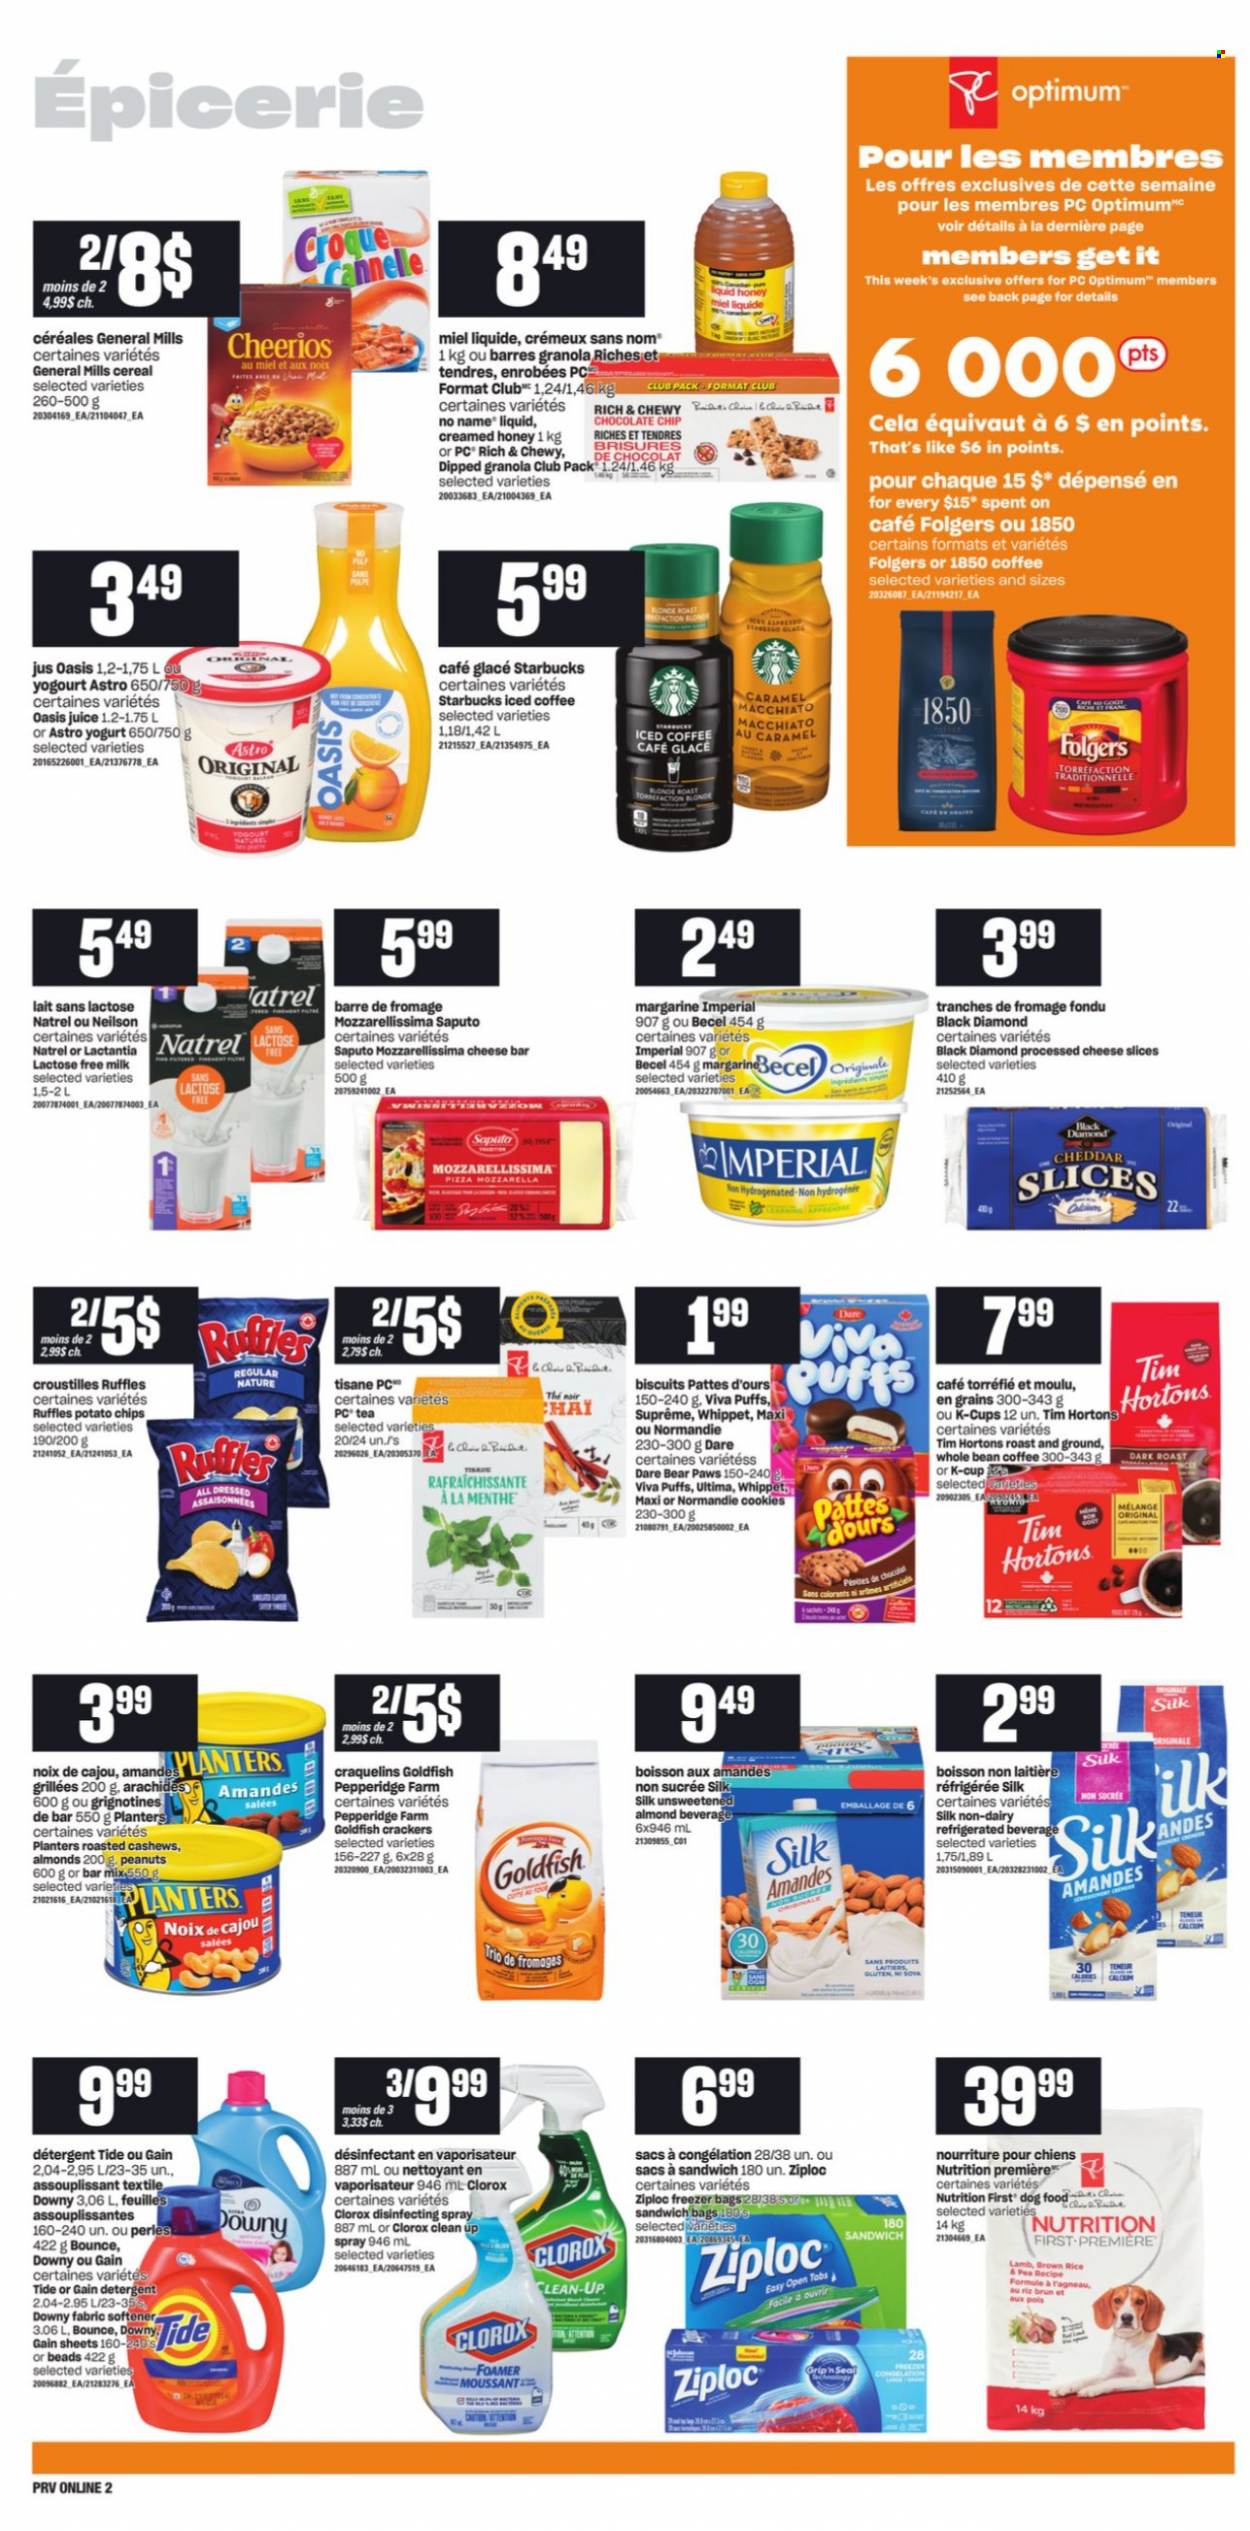 thumbnail - Provigo Flyer - October 14, 2021 - October 20, 2021 - Sales products - puffs, No Name, pizza, sliced cheese, yoghurt, milk, lactose free milk, Silk, margarine, cookies, crackers, biscuit, potato chips, Goldfish, Ruffles, cereals, Cheerios, brown rice, rice, caramel, honey, almonds, cashews, peanuts, Planters, juice, iced coffee, tea, Folgers, coffee capsules, Starbucks, K-Cups, Gain, Clorox, Tide, fabric softener, Bounce, Downy Laundry, bag, Ziploc, detergent, granola, chips. Page 6.